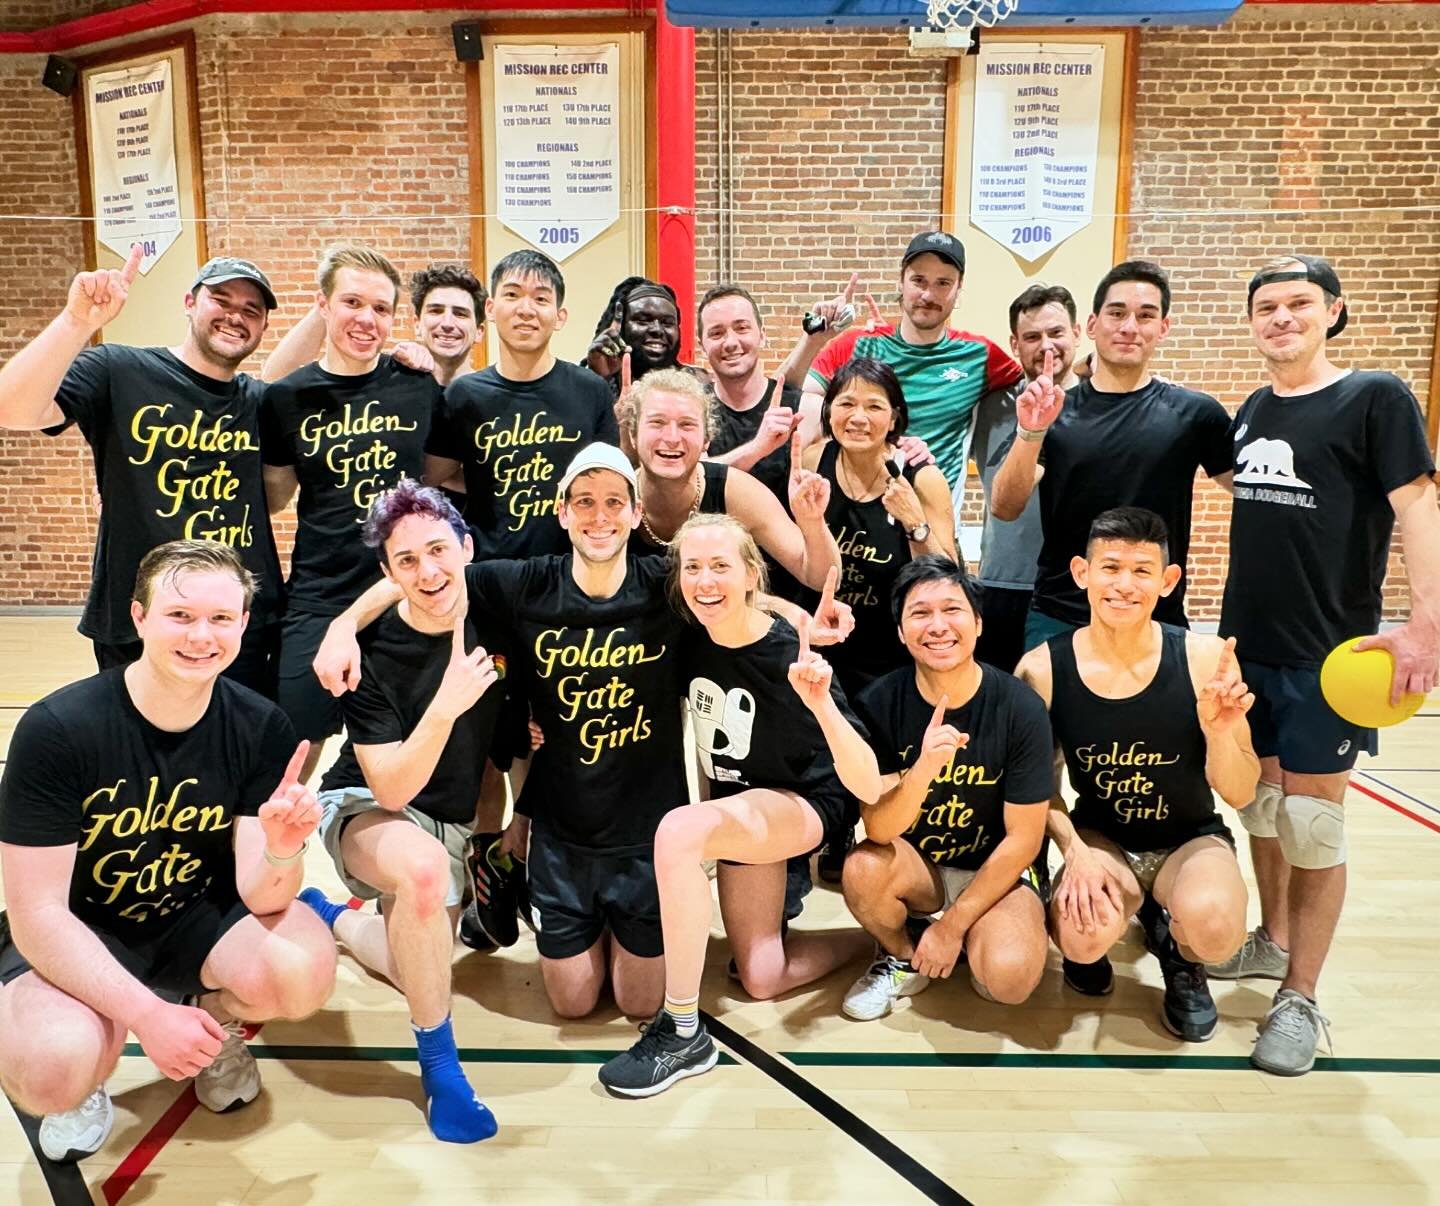 Congrats to our Winter Buddy League dodgeball  champs:

🥇✨Golden Gate Girls✨🥇 

@outloudsports #queersports #SF #disgebakl